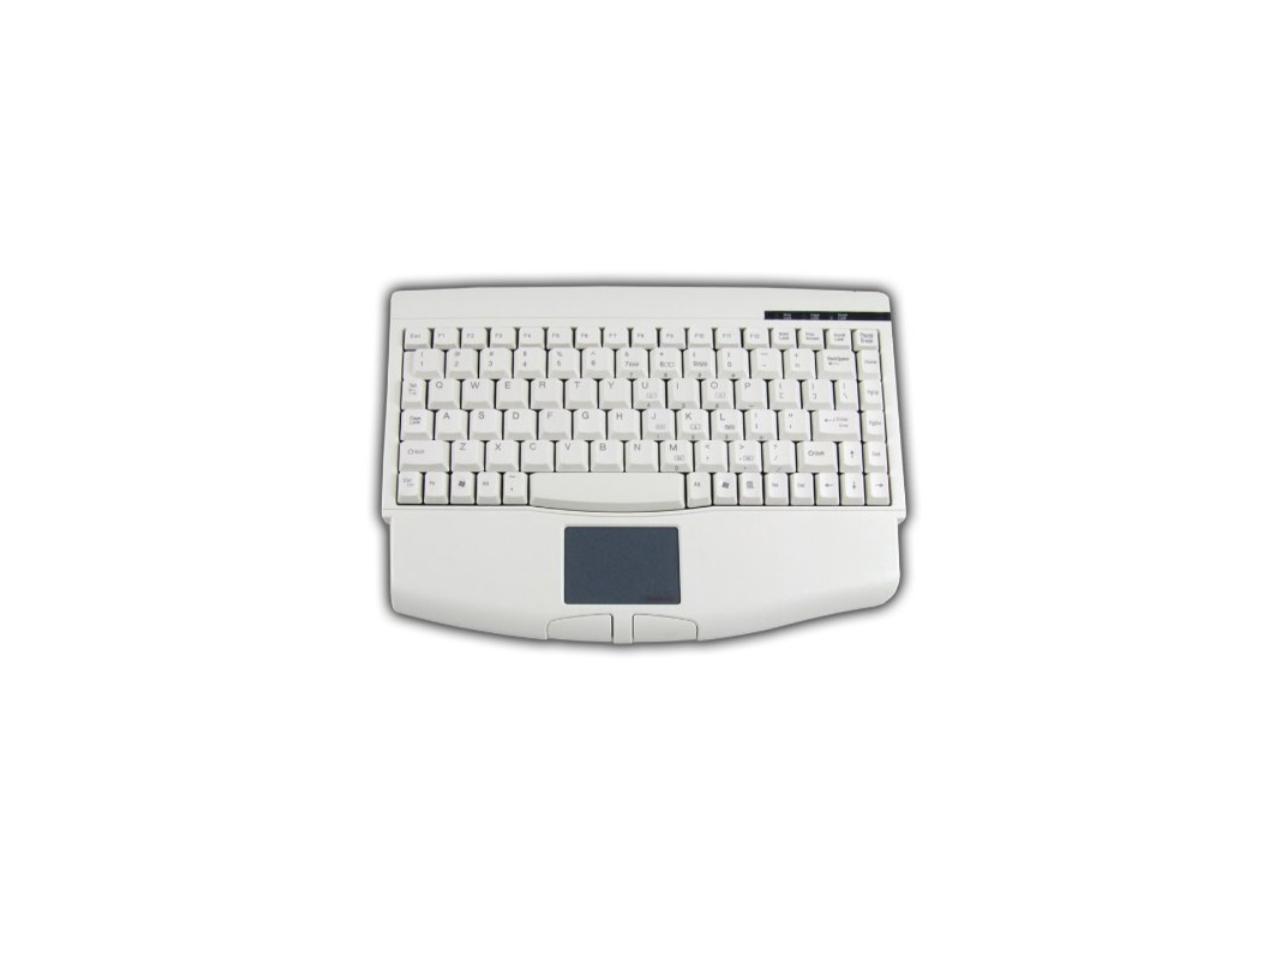 Adesso Mini Touchpad USB Keyboard for Windows with Wrist Rest (ACK-540UW)